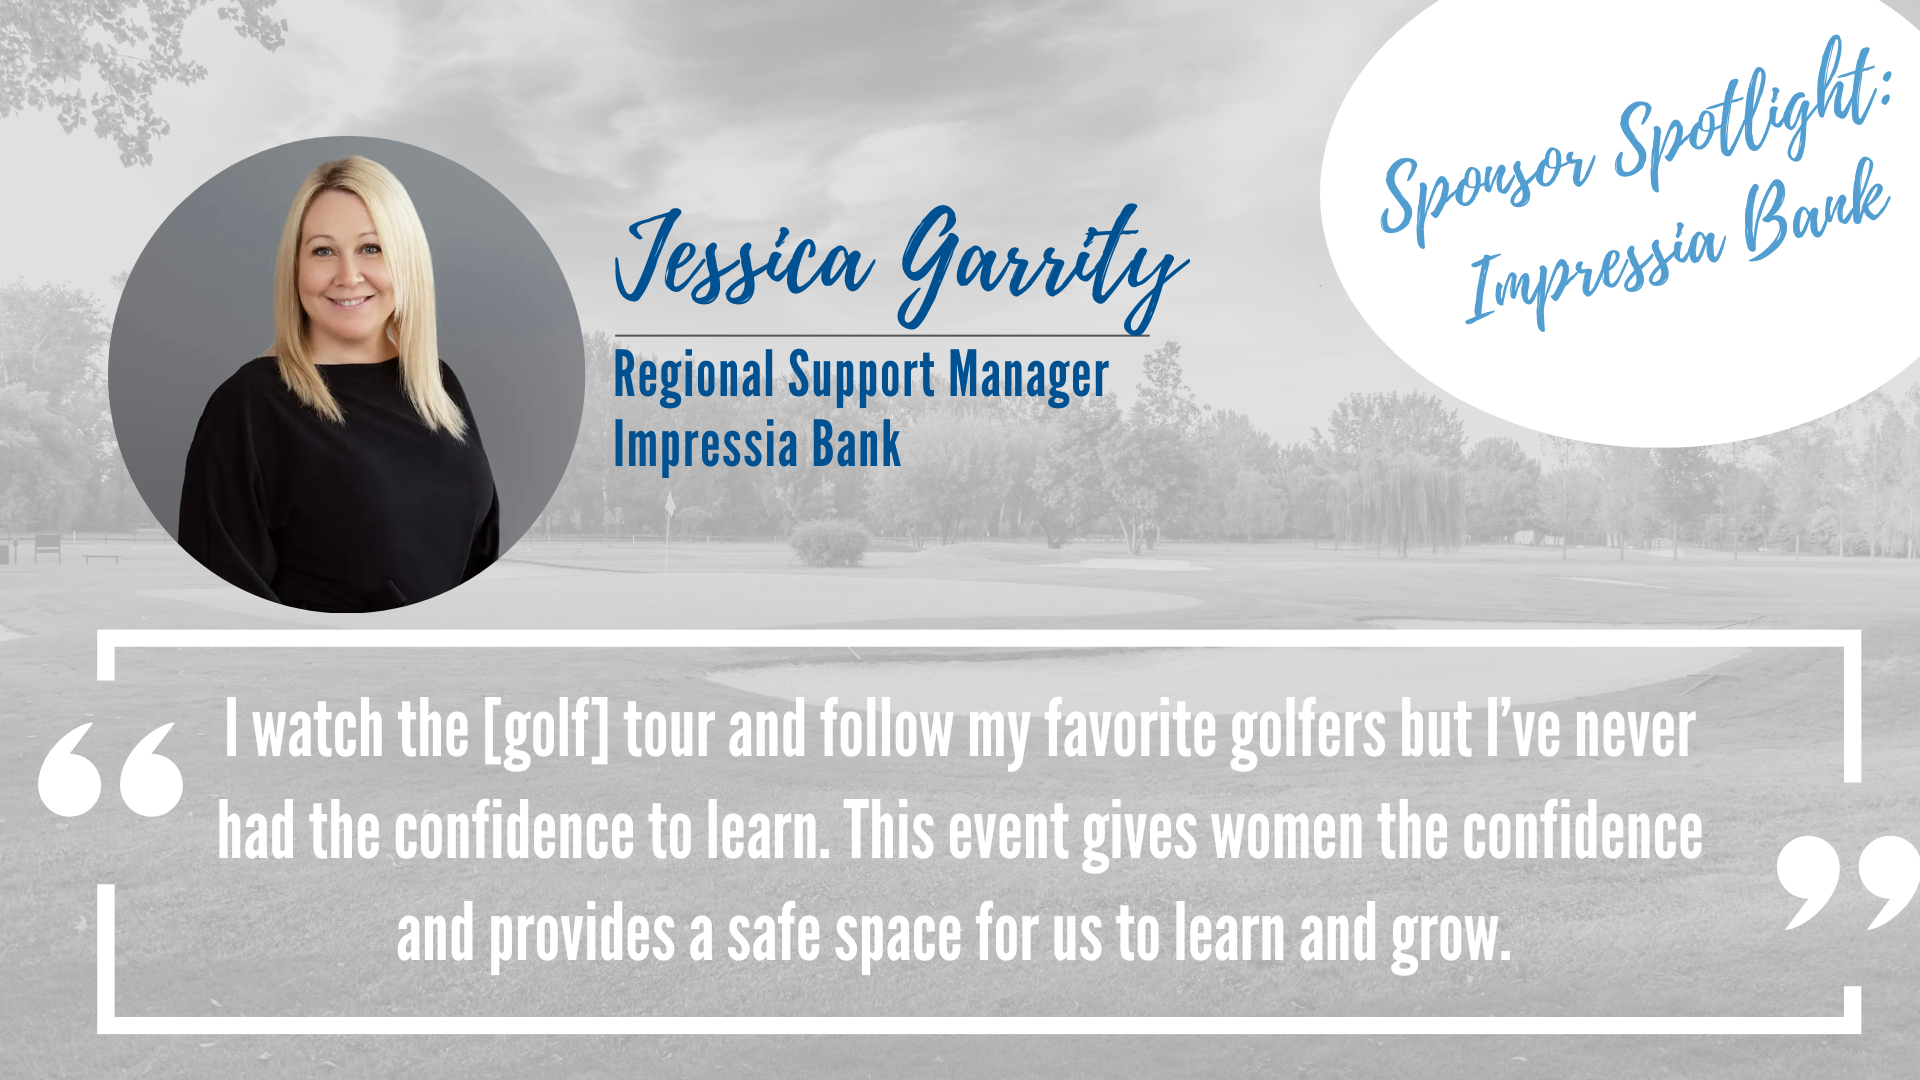 Picture of Jessica Garrity regional support manager for Impressia Bank with a quote " I watch the [golf] tour and follow my favorite golfers but I've never had the confidence to learn. This event gives women the confidences and provides a safe space for us to learn and grow." 